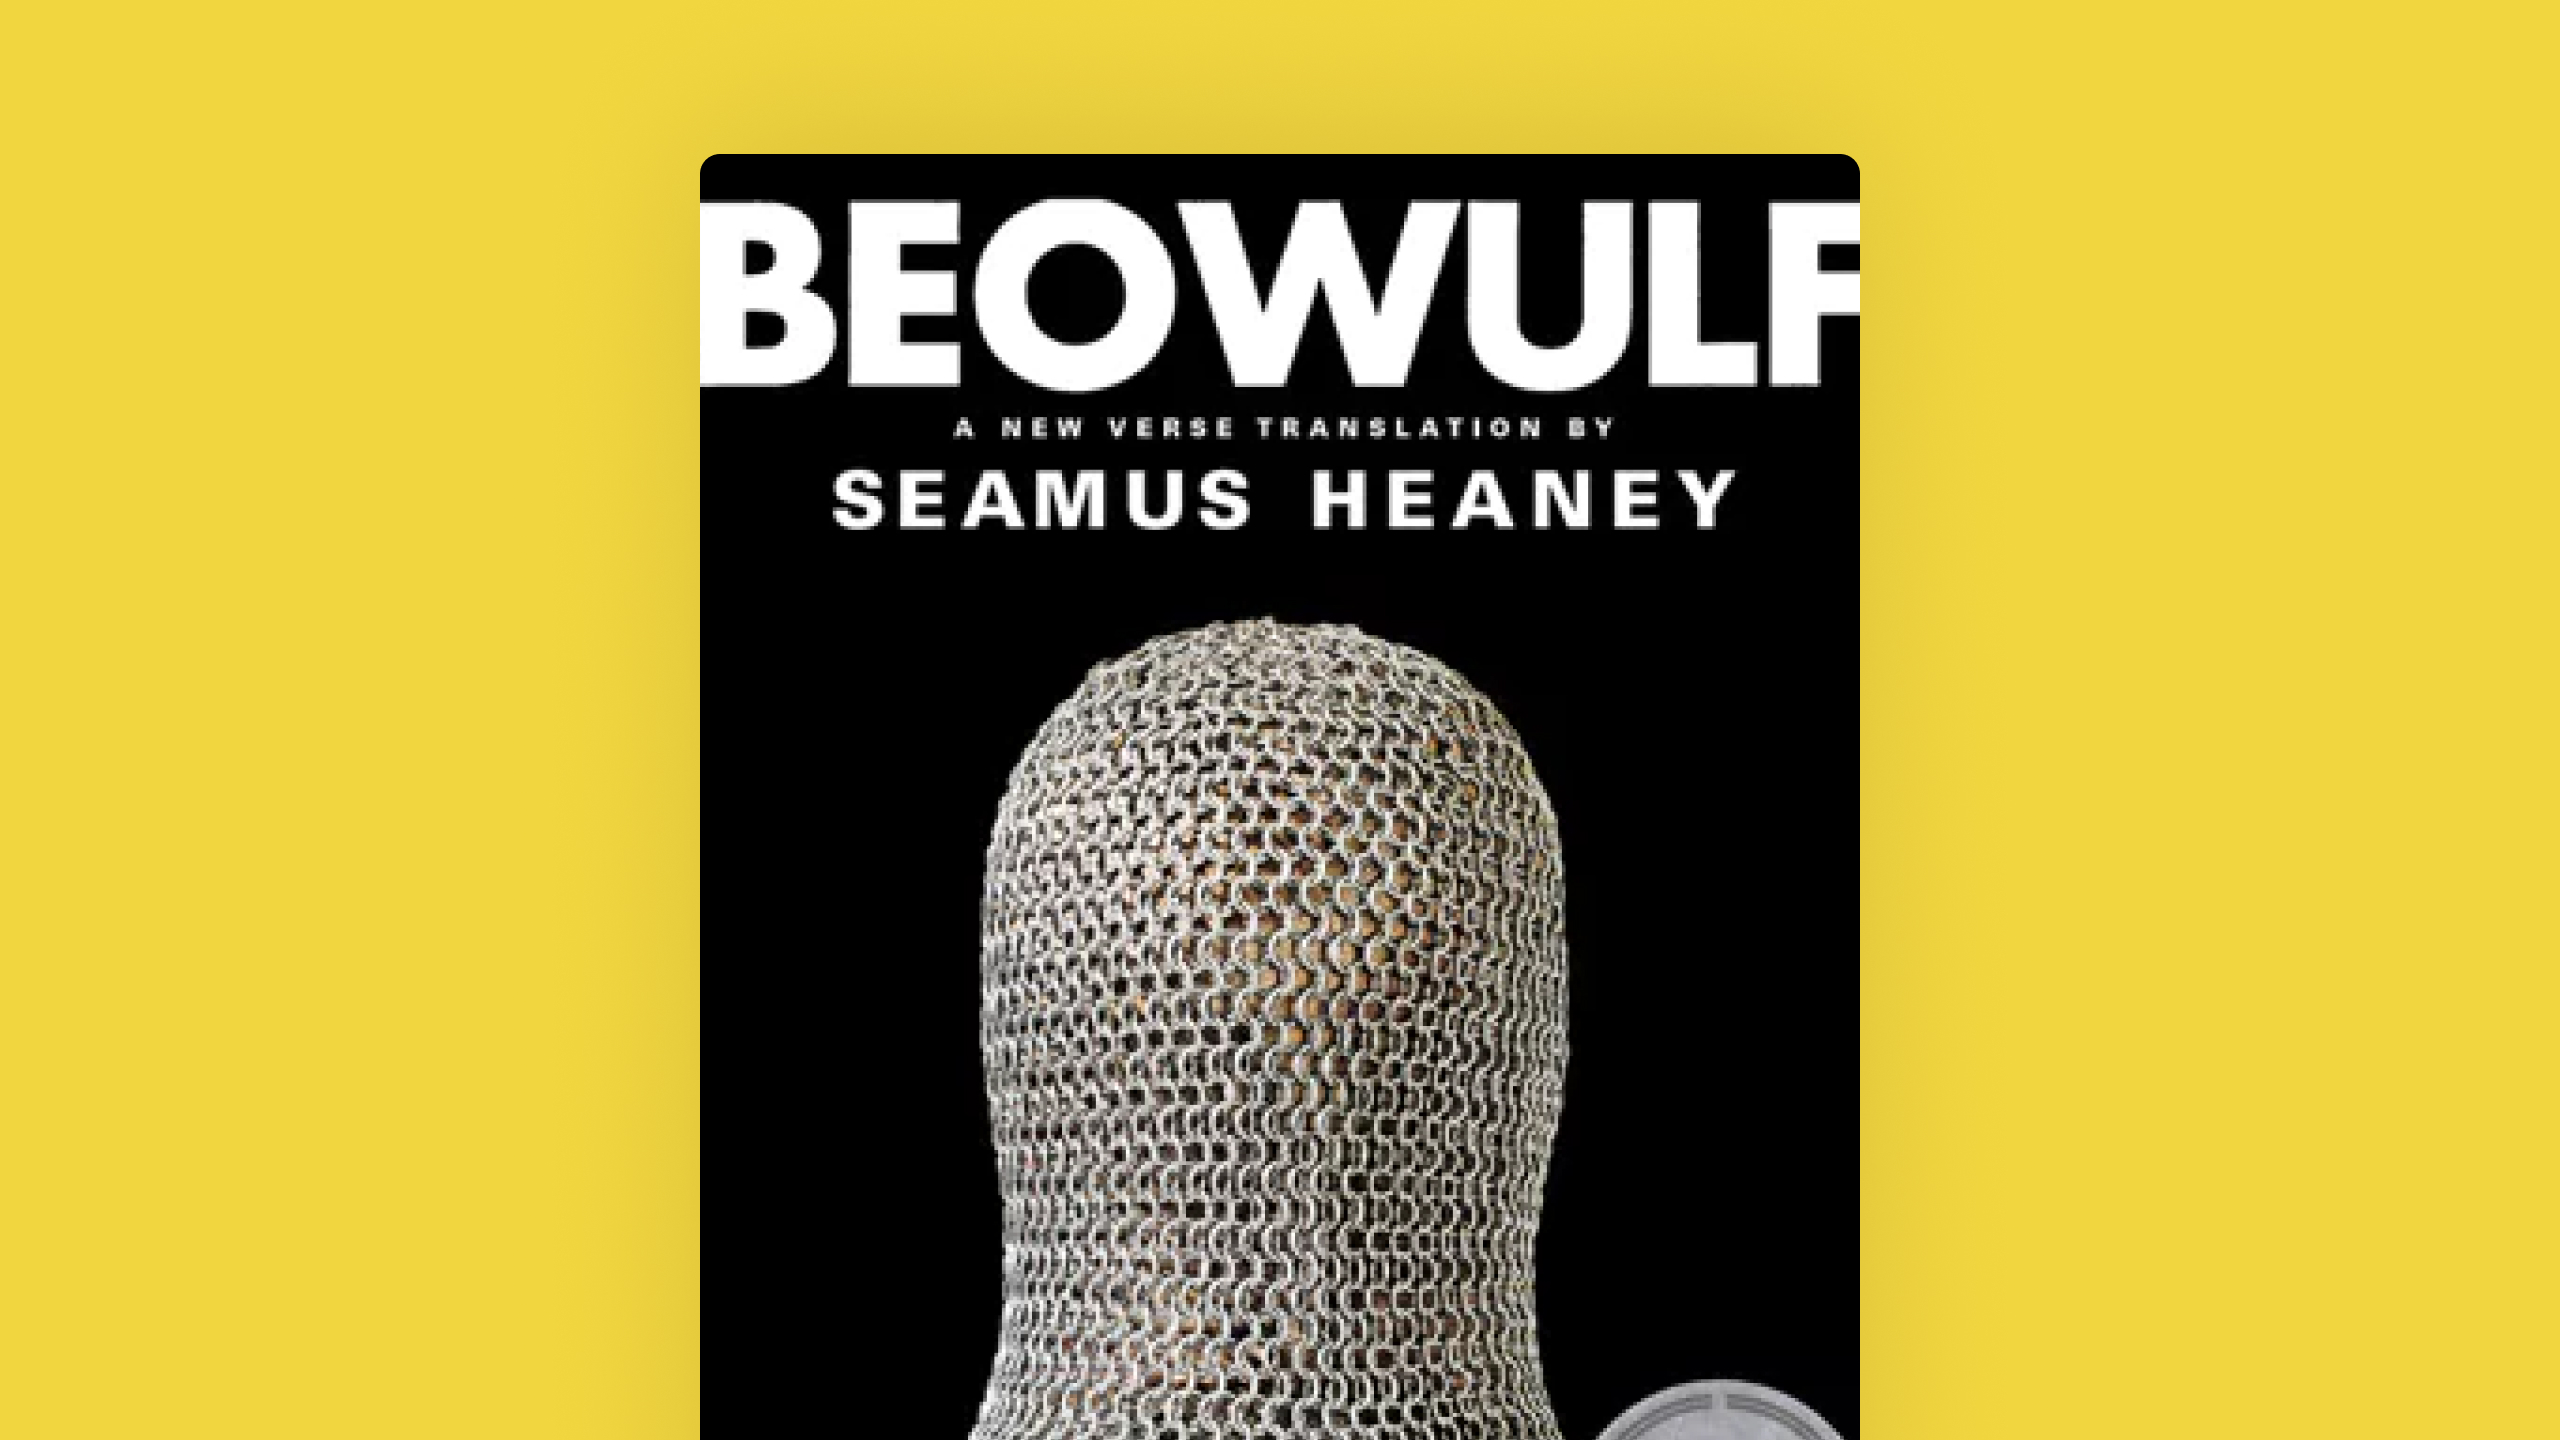 Beowulf Student Guide